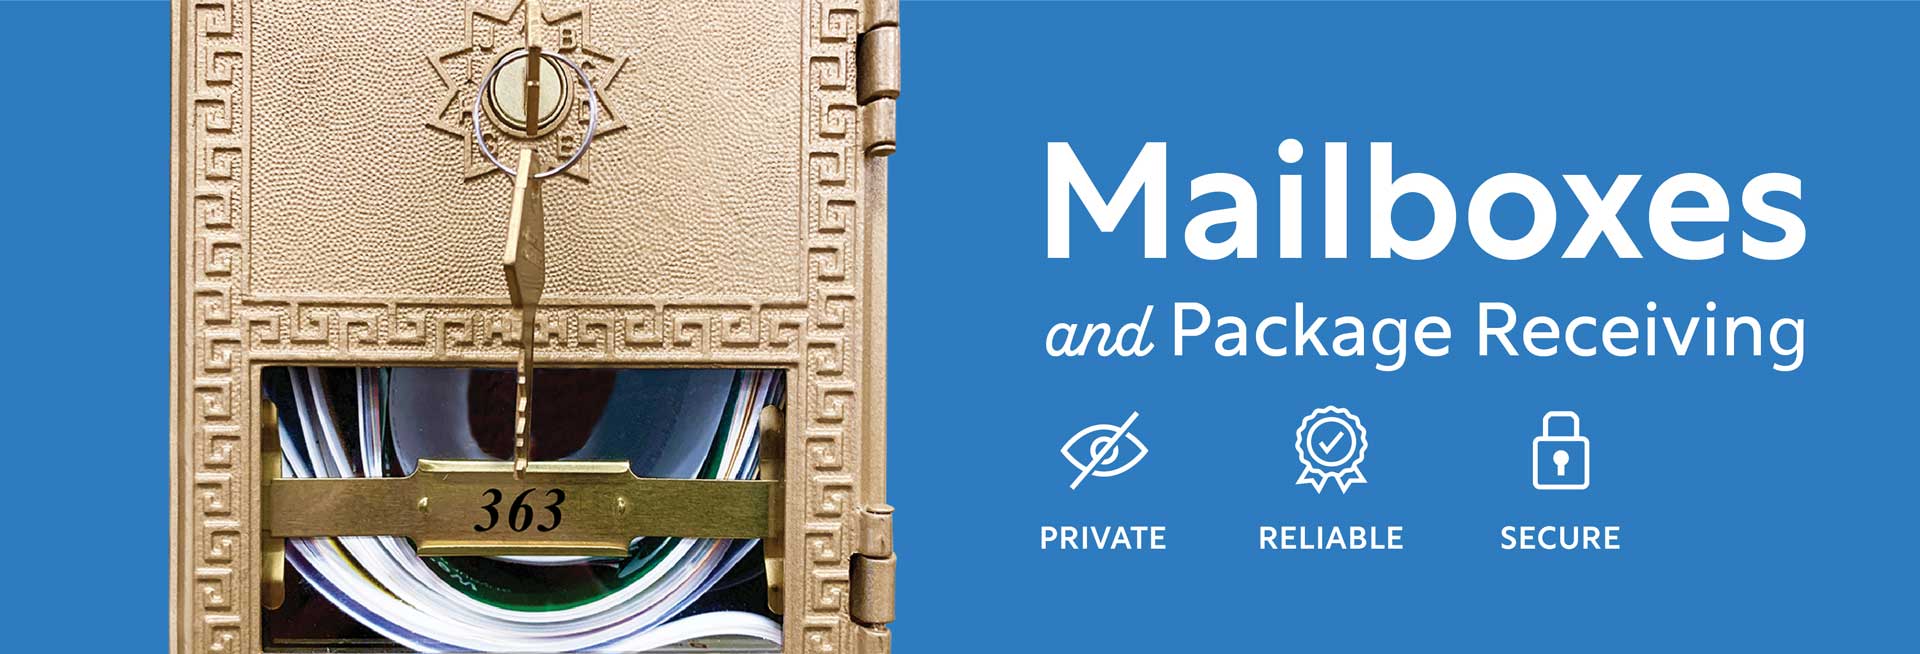 Mailboxes and Package Receiving. Private. Reliable. Secure.